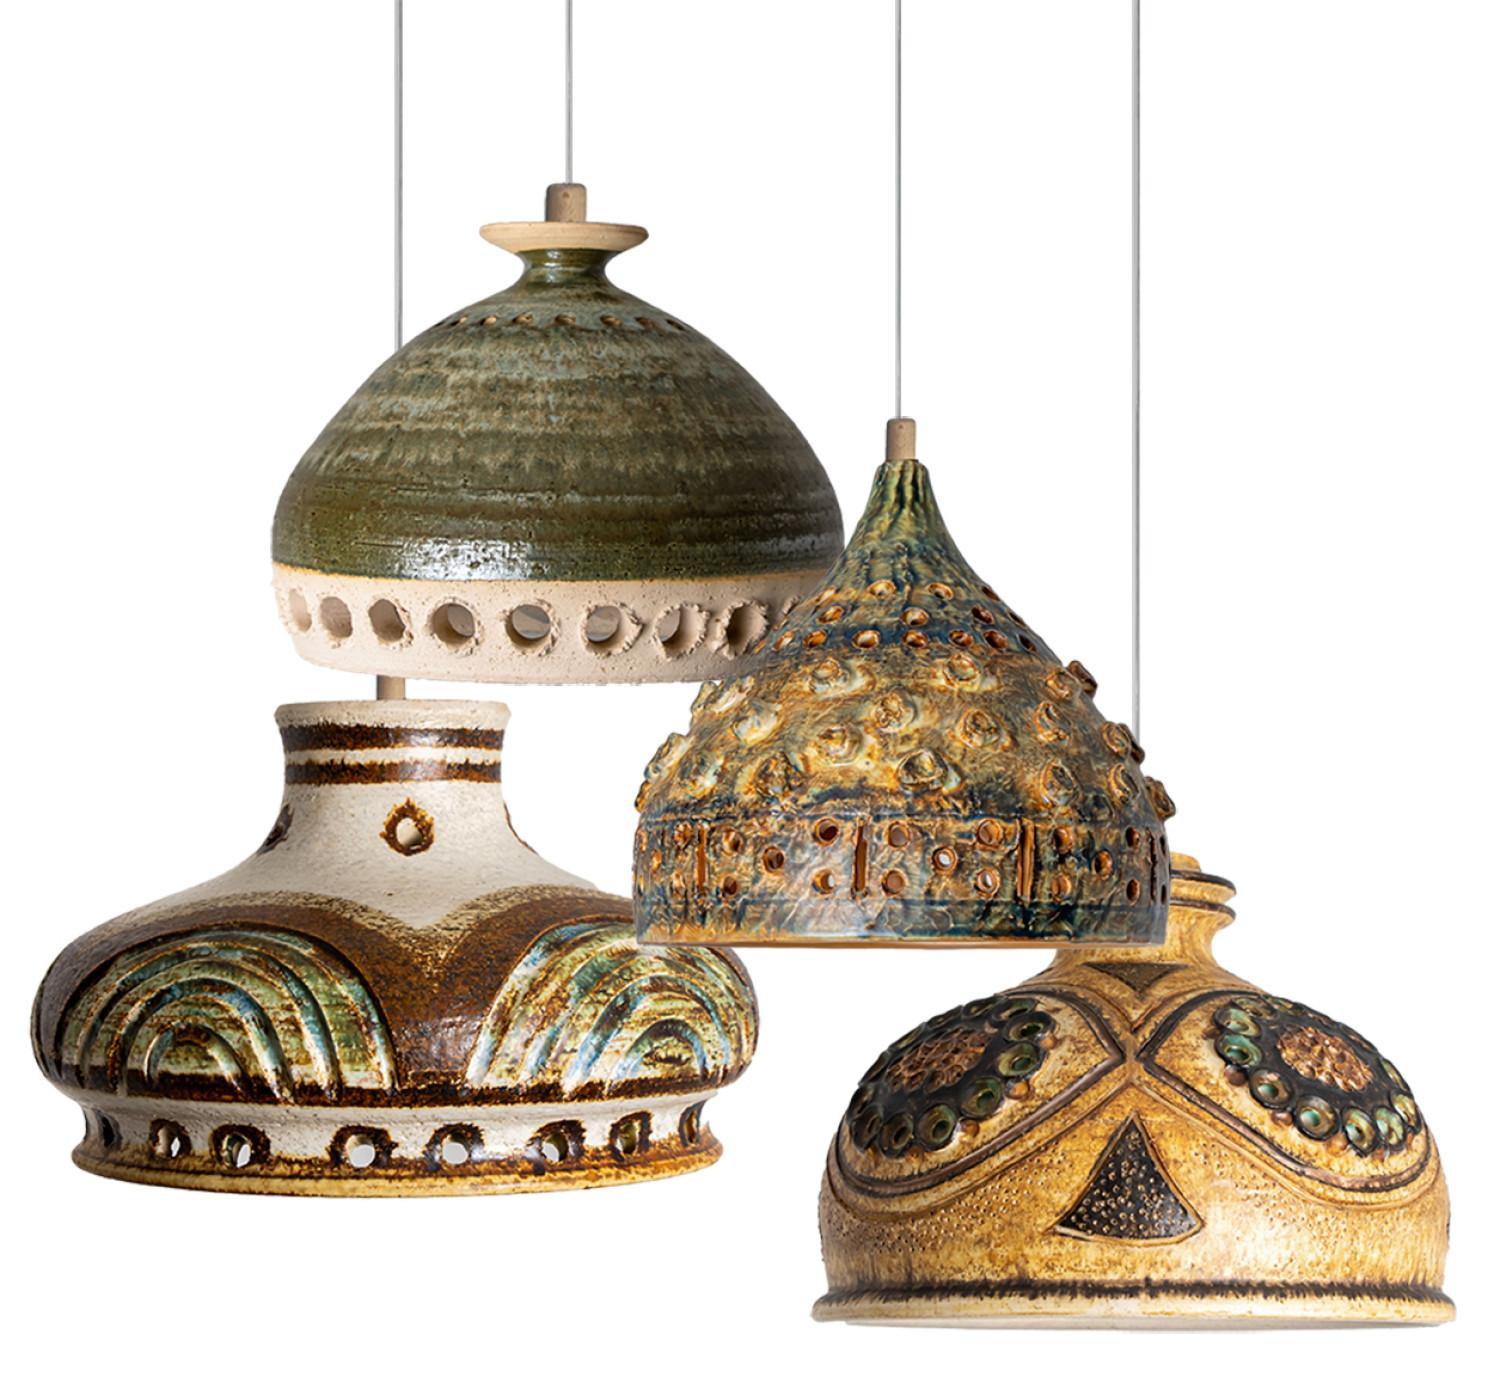 Playful arrangement of stunning round hanging lamps with an unusual shape, made with rich light colored brown ceramics, manufactured in the 1970s in Denmark. We have a multitude of unique colored ceramic light sets and arrangements, all available in